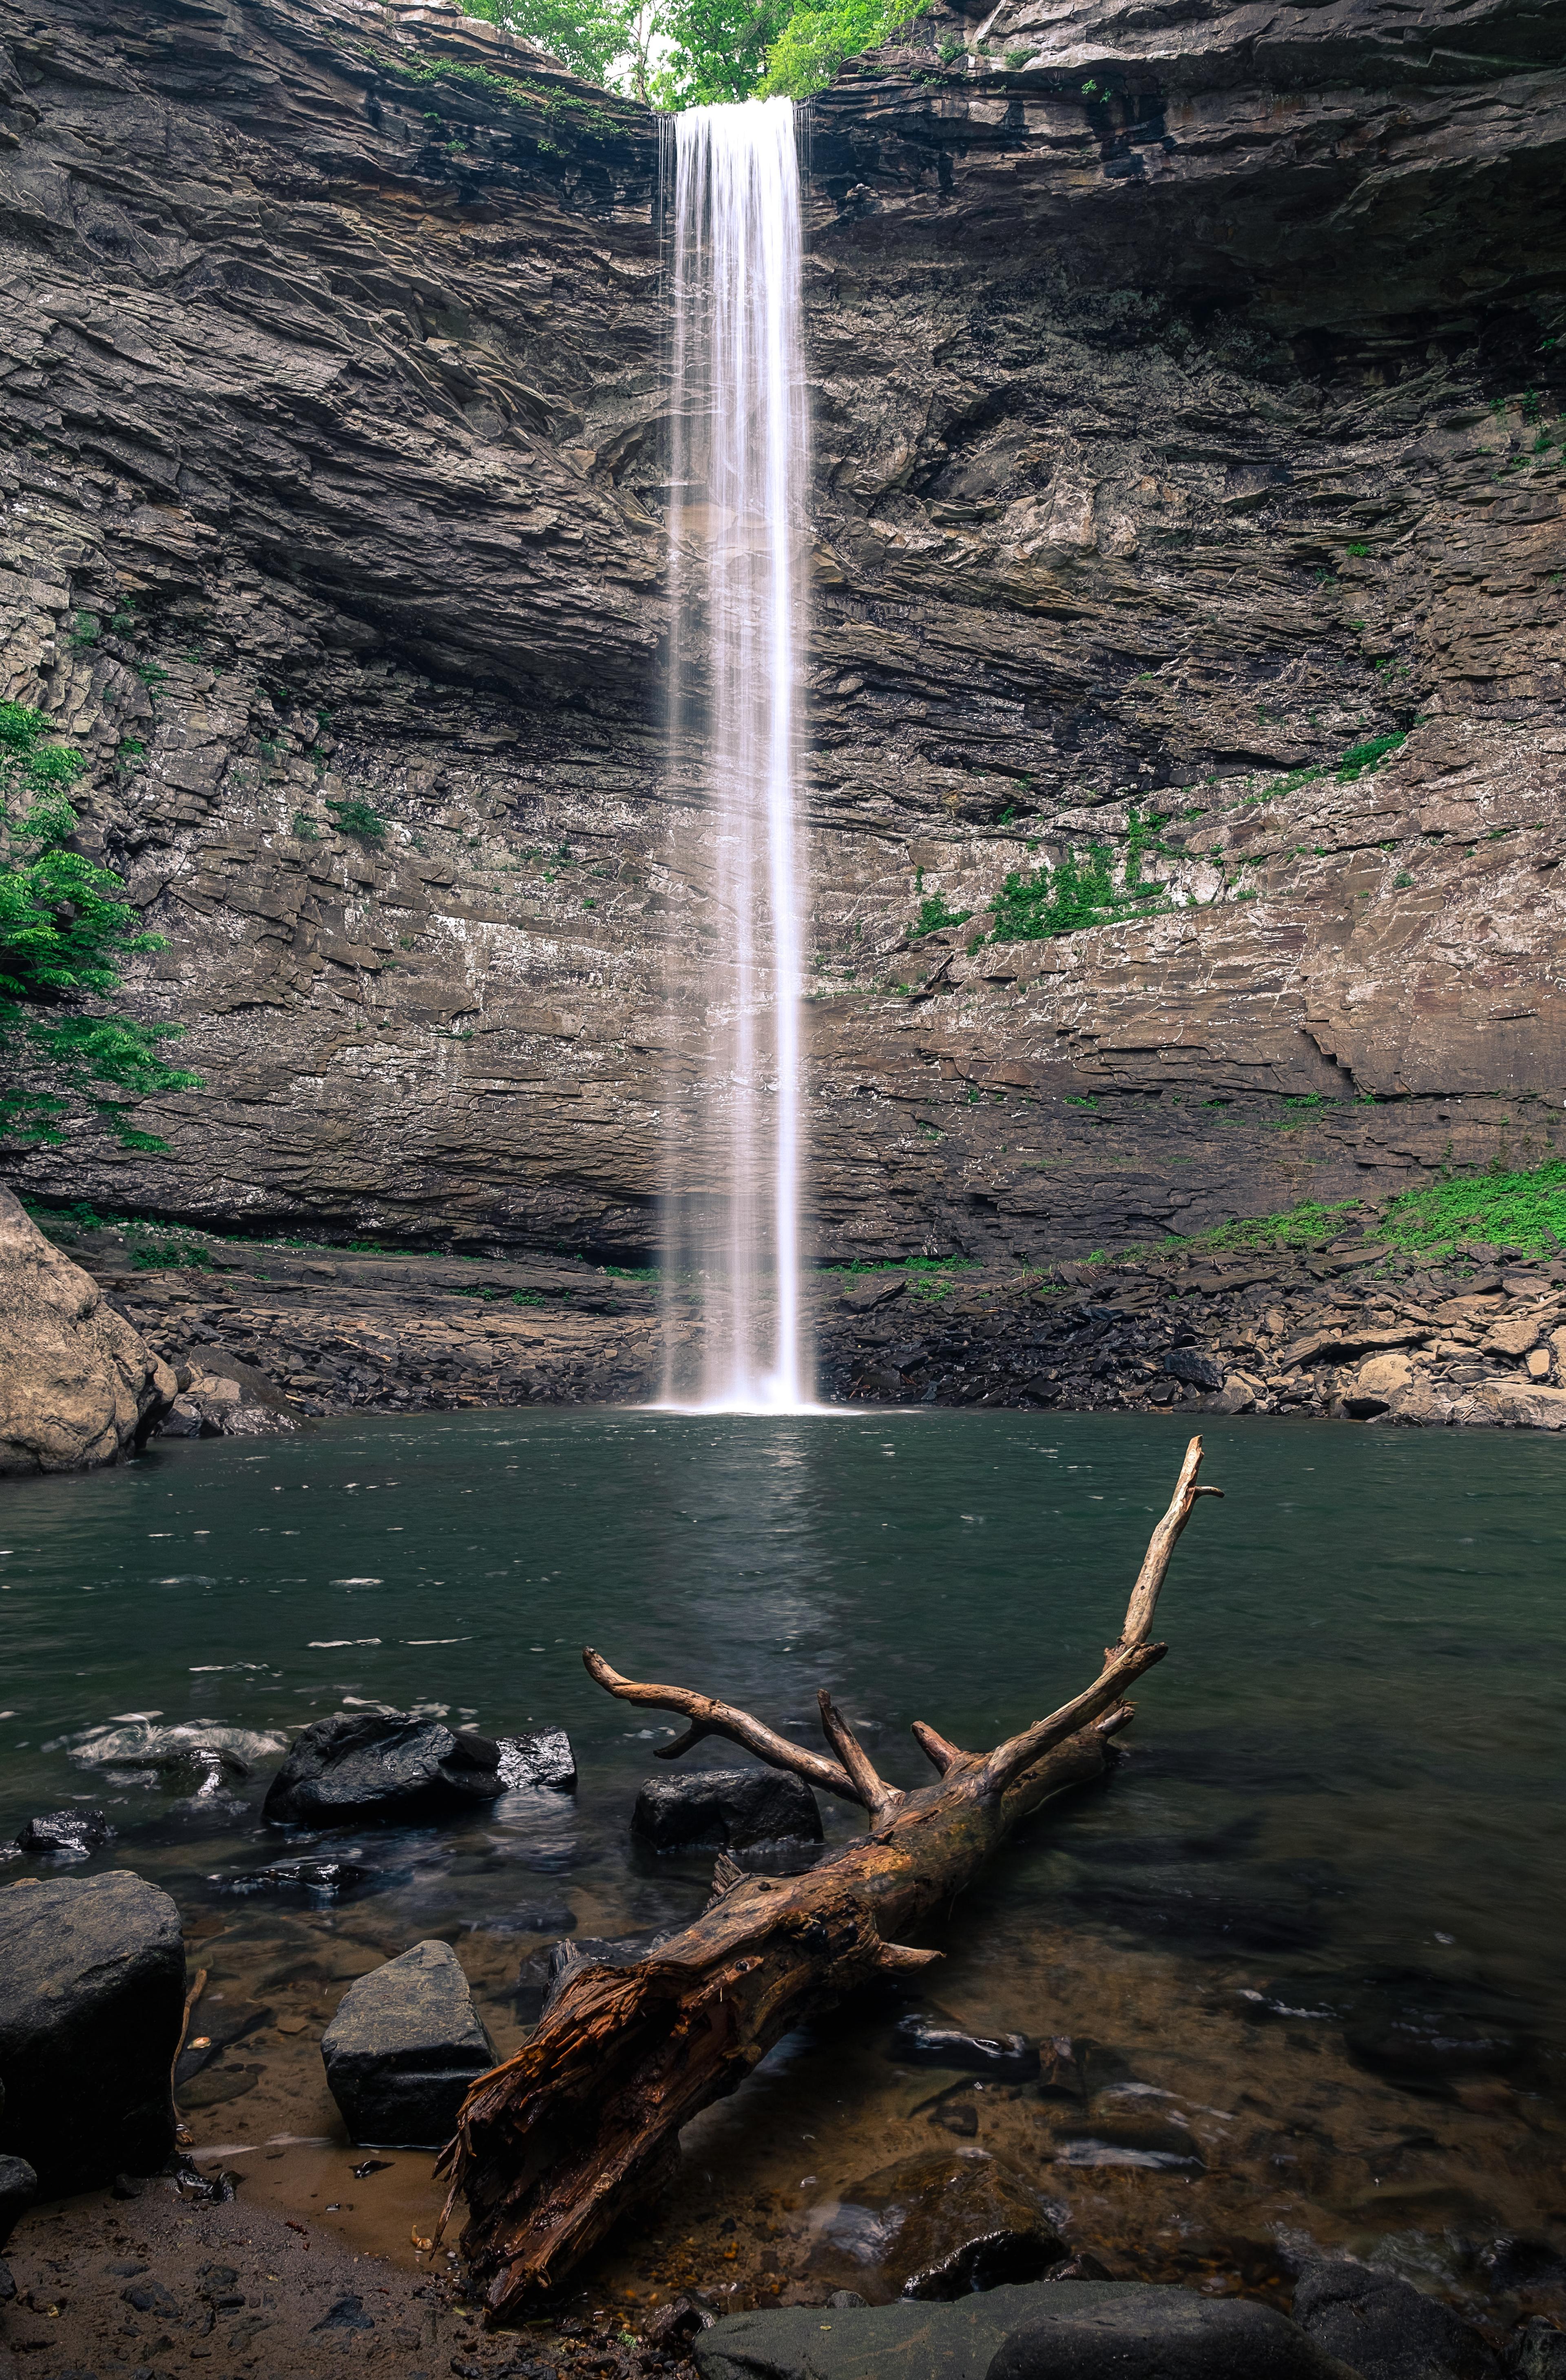 View of Ozone Falls in Tennessee.